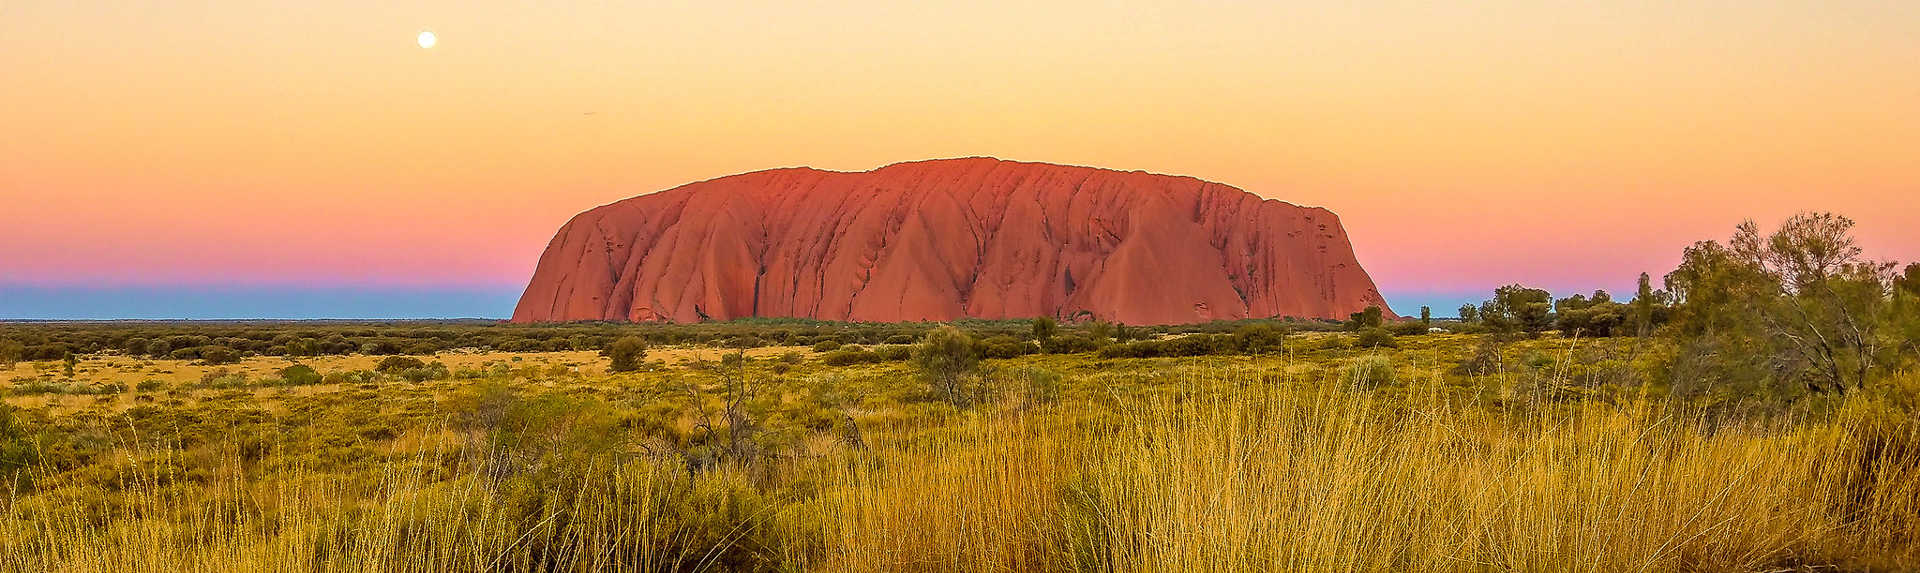 What is the best month to visit Uluru?